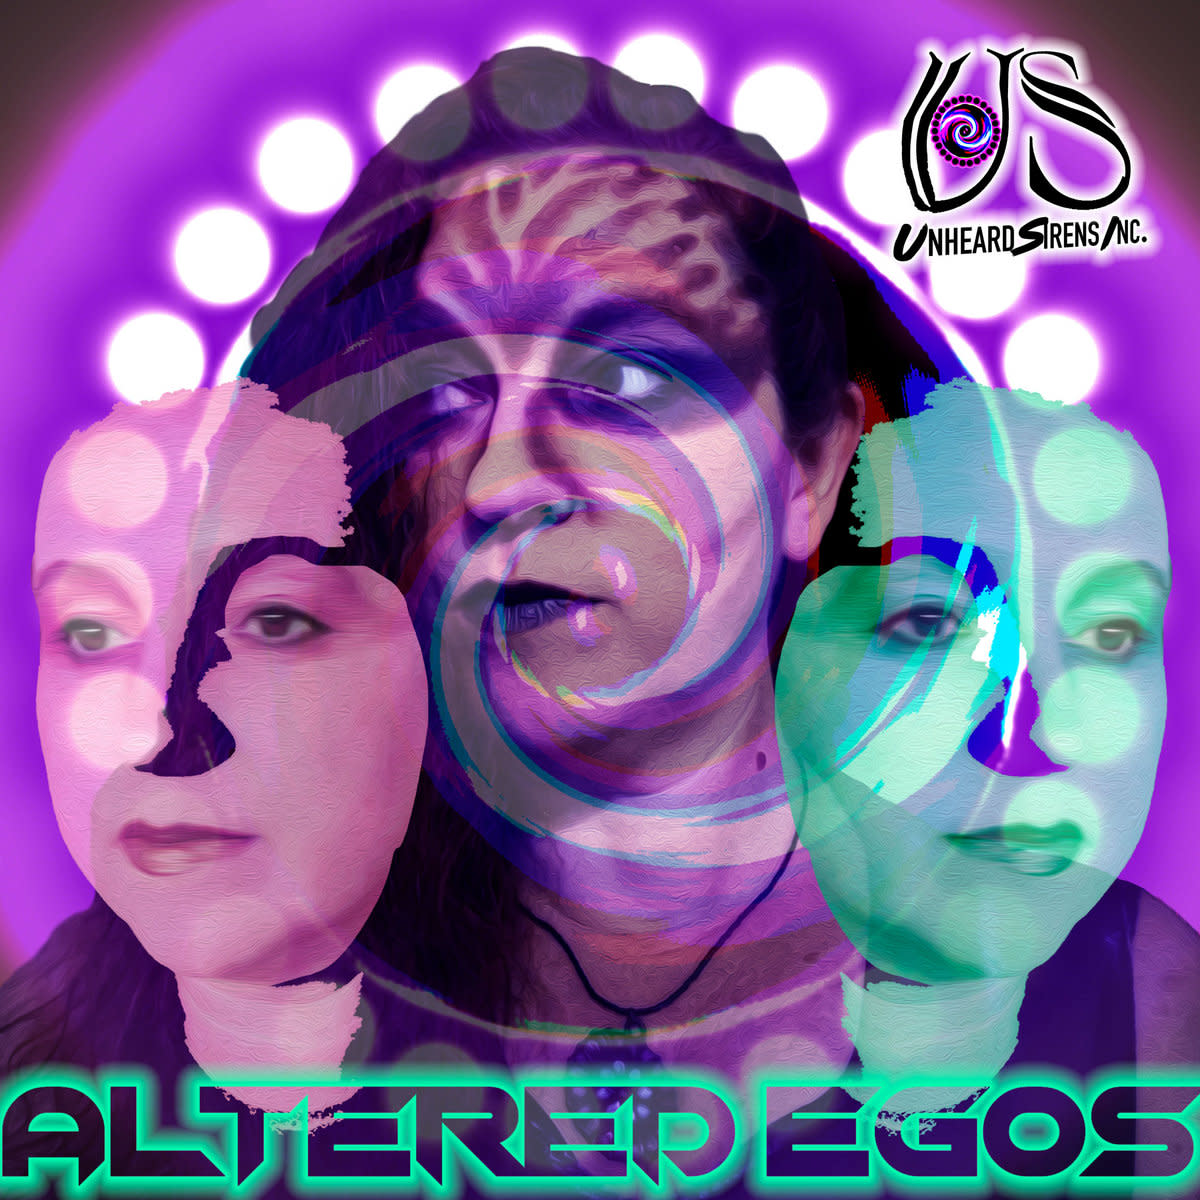 synth-single-review-altered-egos-by-unheard-sirens-incorporated